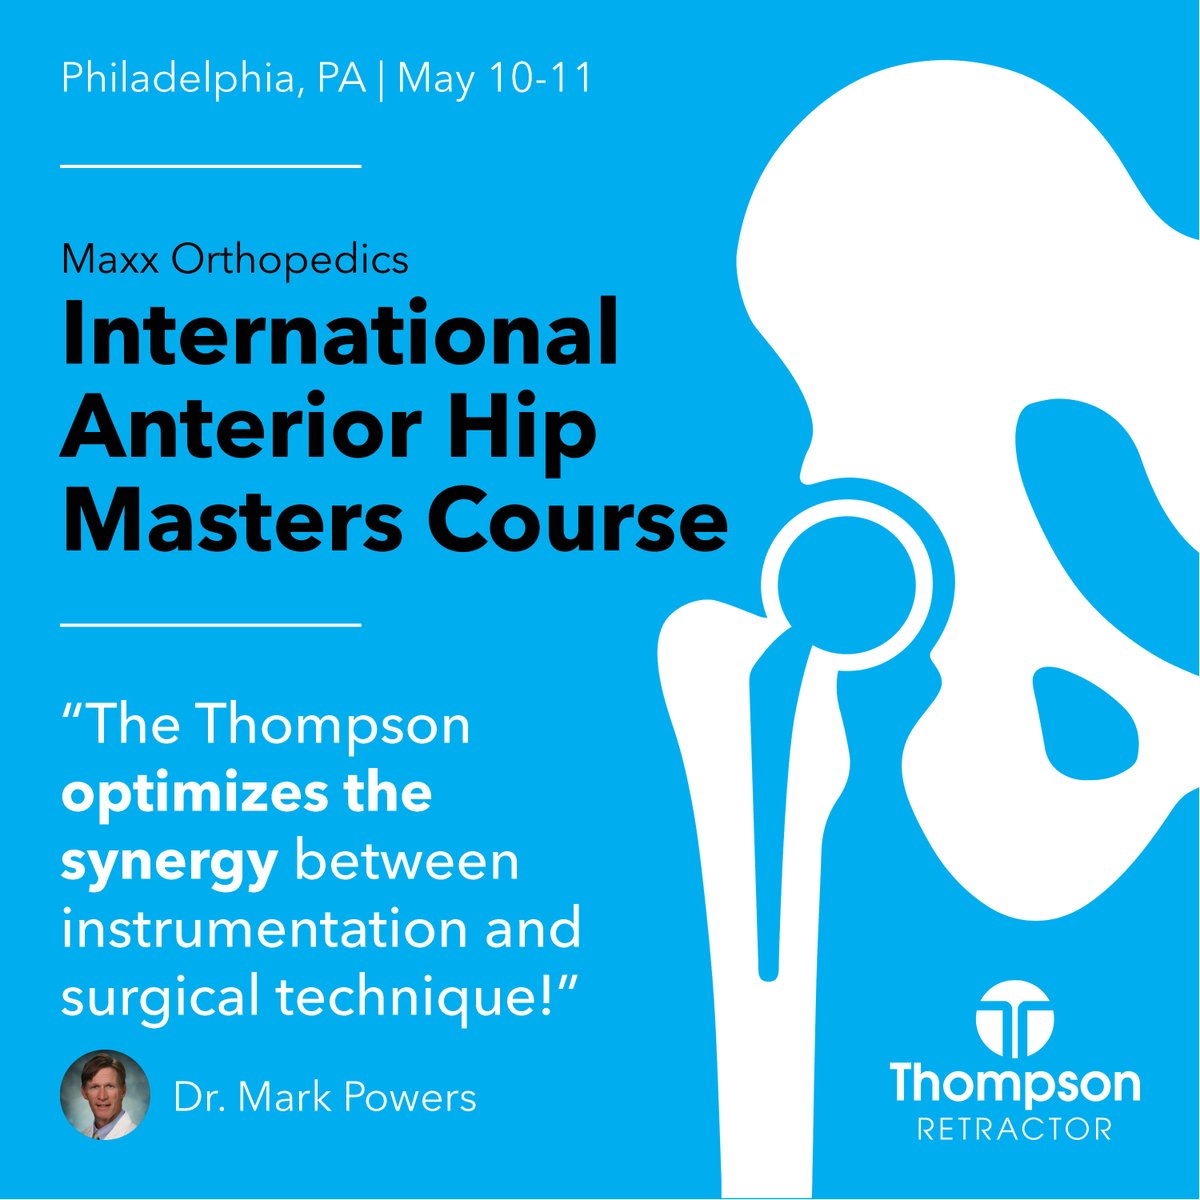 Join Dr. Mark Powers and an incredible faculty of surgeons as they share their techniques and tricks for Direct Anterior Approaches to the Hip at the Maxx Orthopedics International Anterior Hip Masters Course! The Thompson Retractor will be used in the lab for hands-on learning!